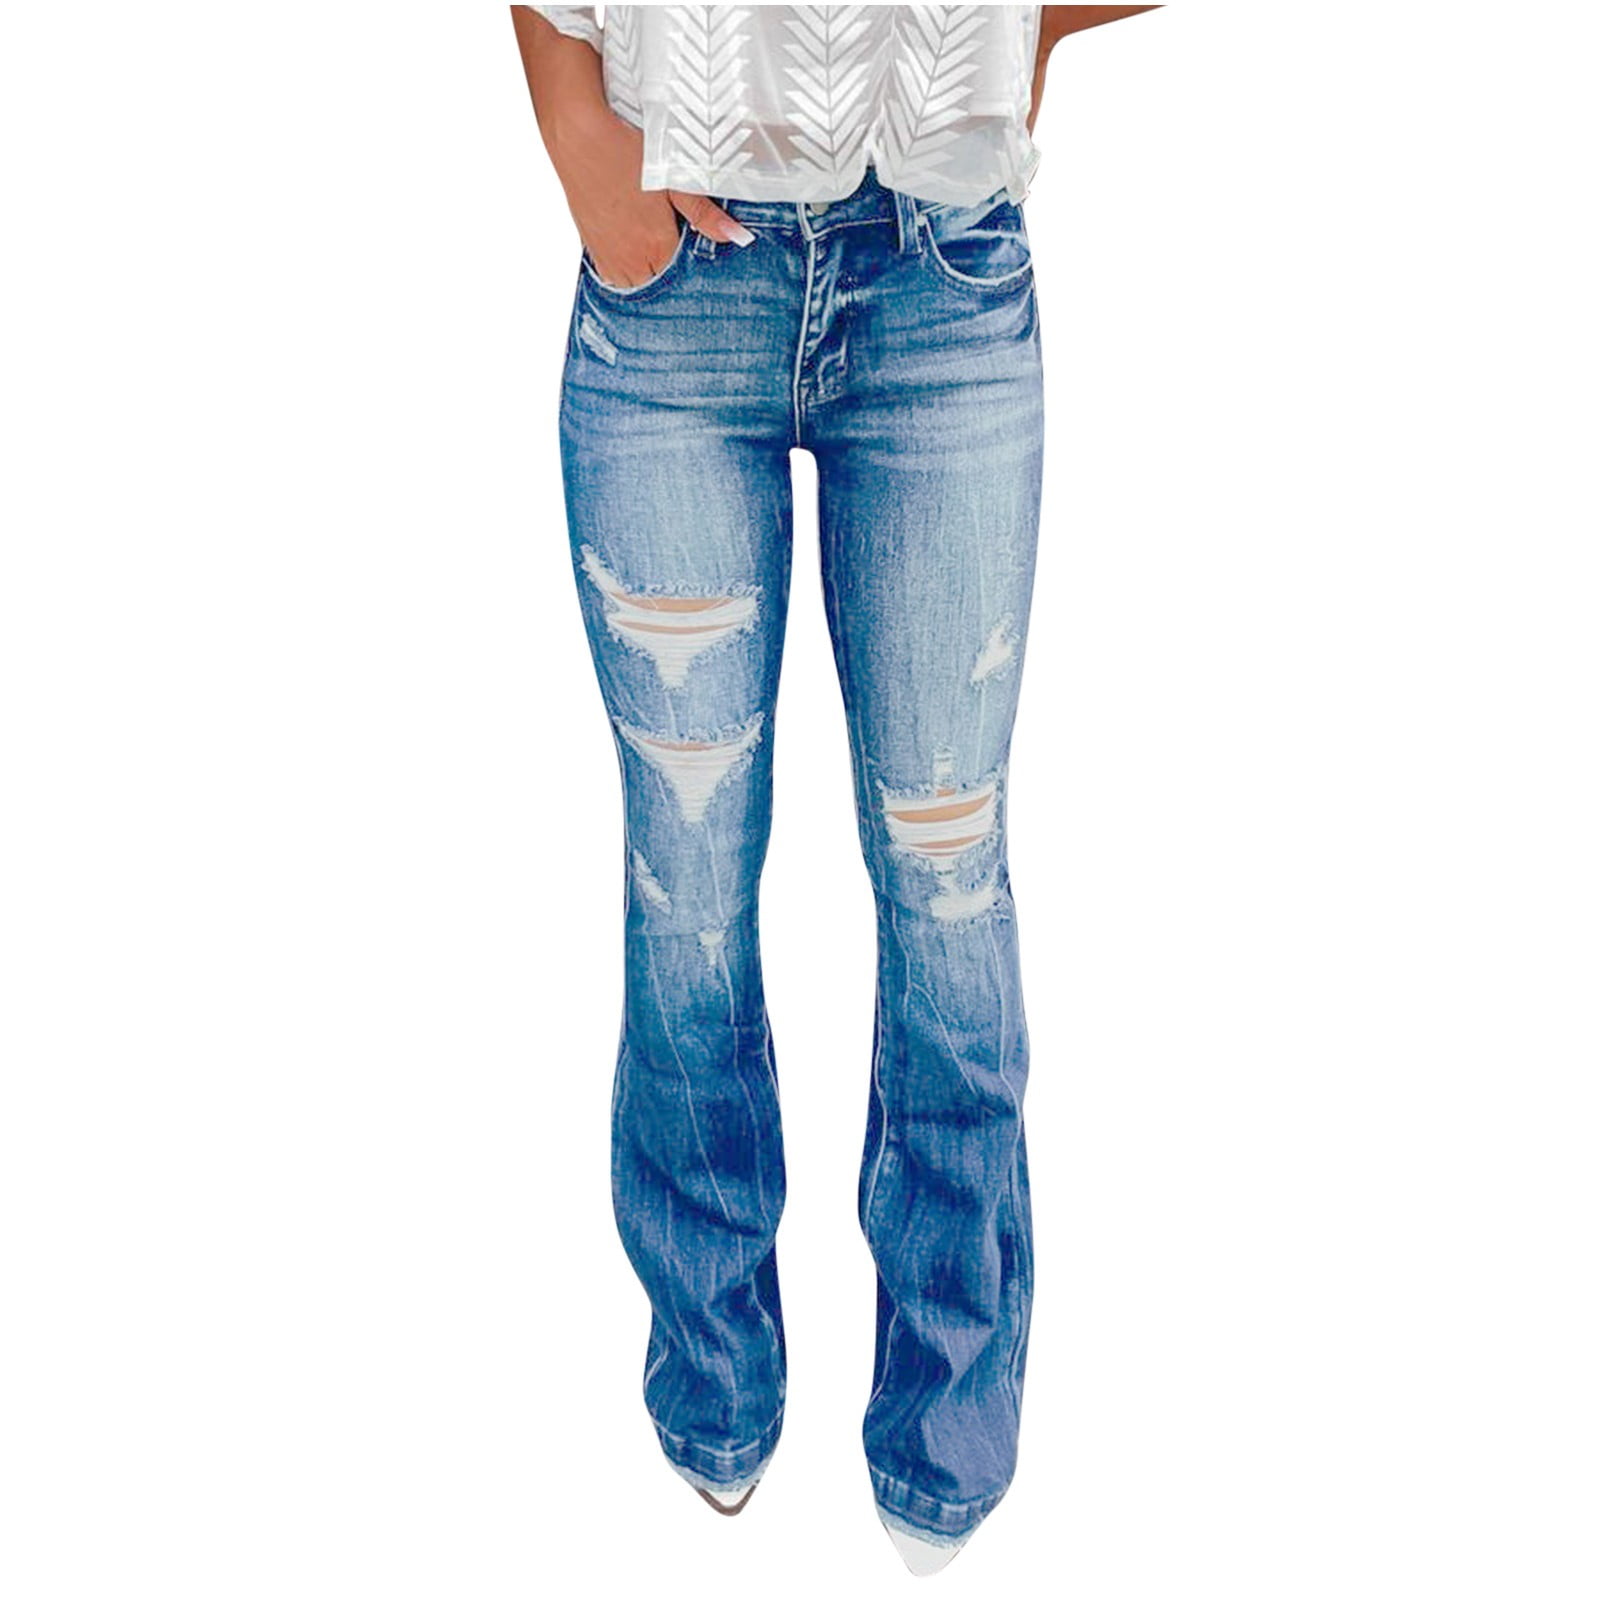 Bell Bottom Jeans for Women Ripped High Waisted Classic Flared